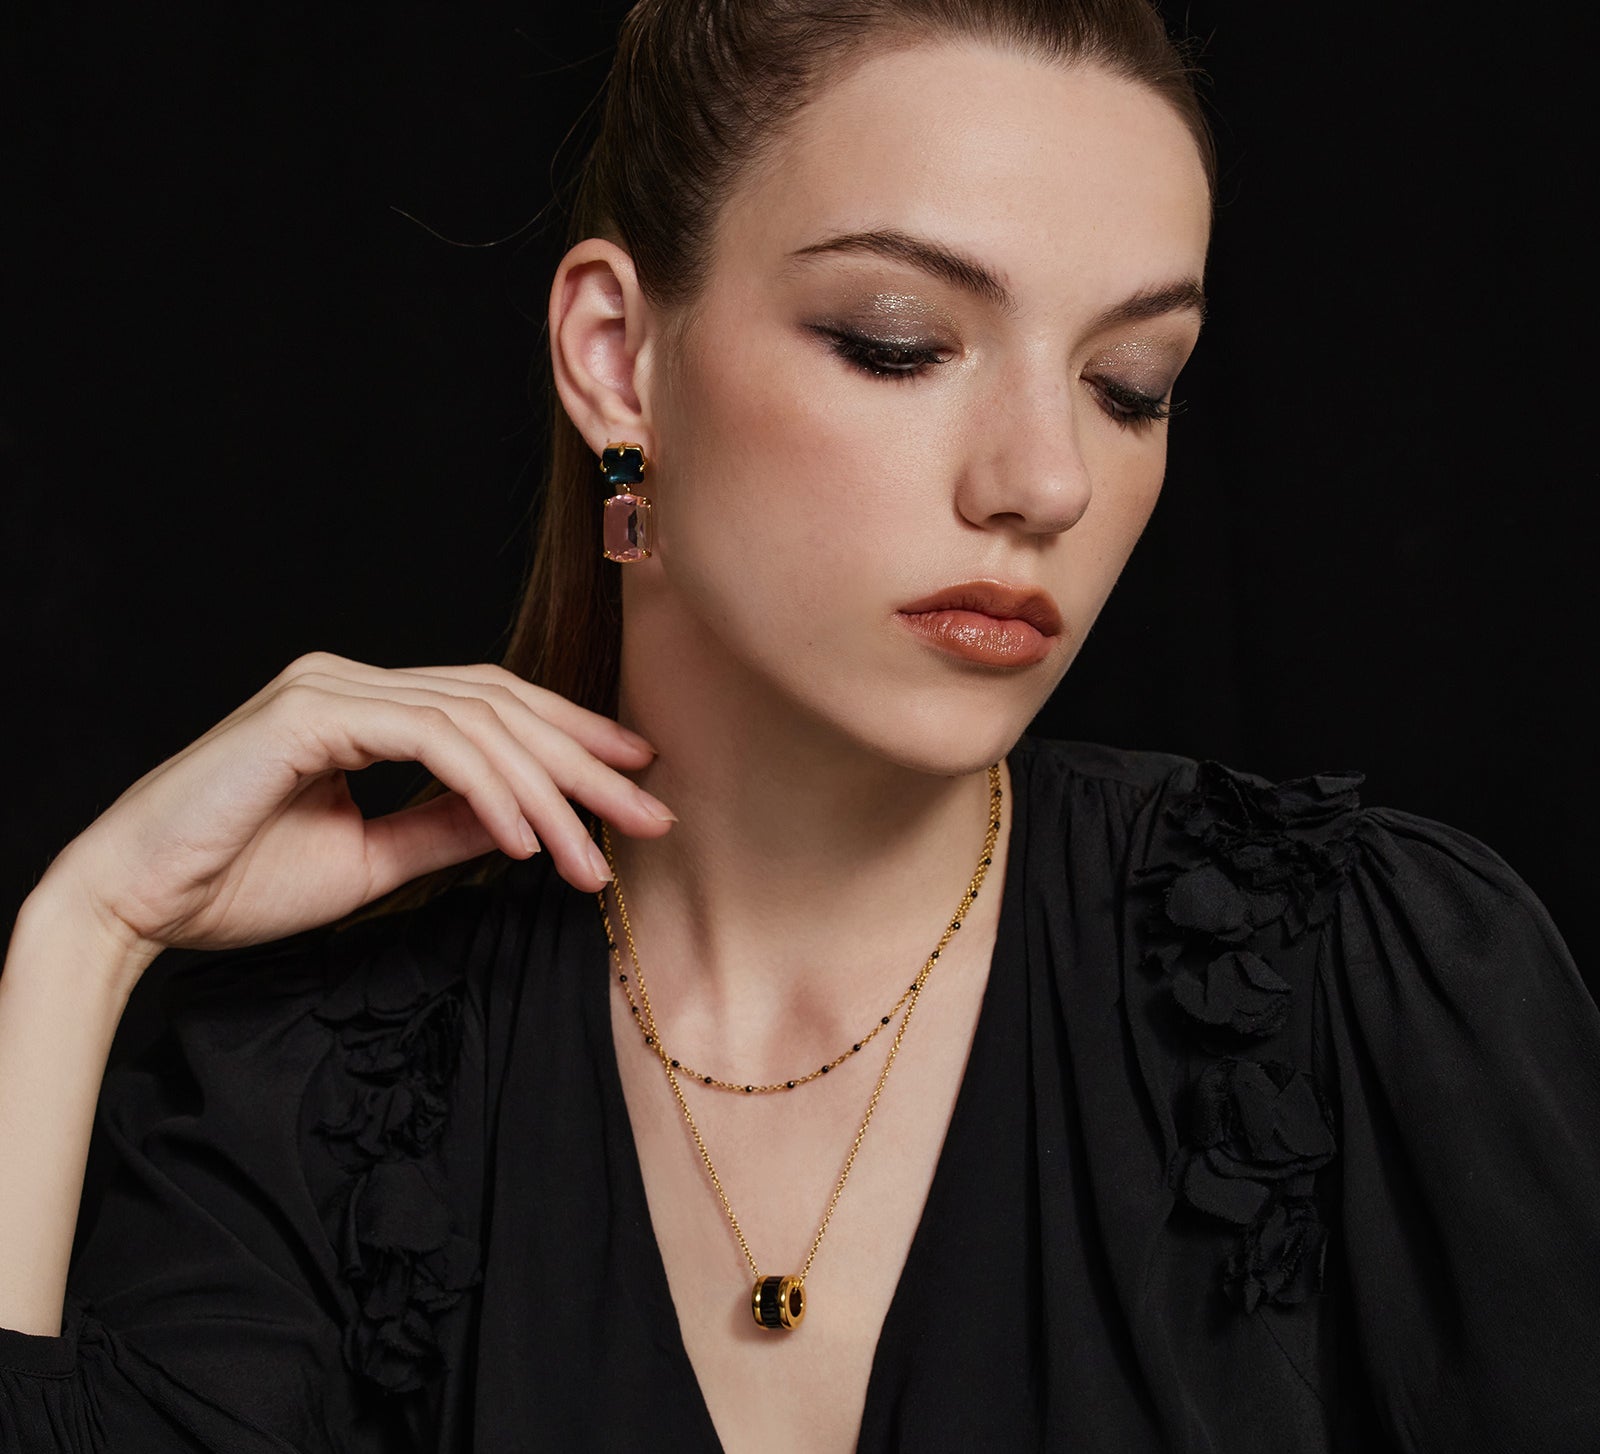 Black Ring Pendant Necklace, exuding edgy elegance, this necklace showcases a sleek black ring pendant on a delicate chain, making it a stylish and contemporary accessory for any occasion.